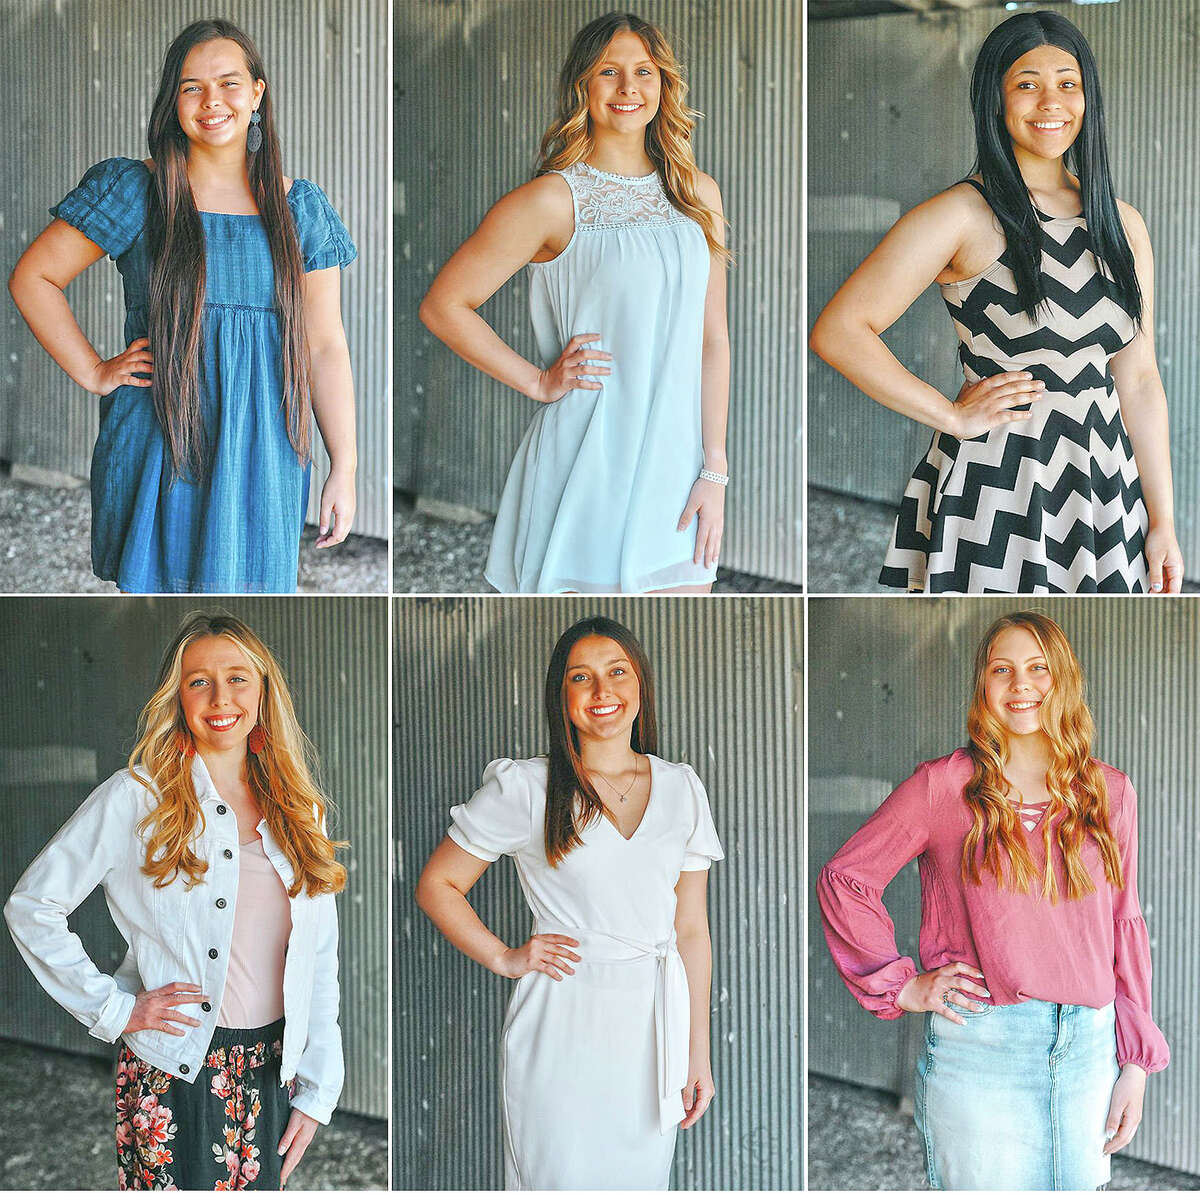 Miss Greene County Fair contestants are Kenleigh Megginson (from top left) of Roodhouse, Kennedy Ruyle of Carrollton, Laekyn Dobson of Roodhouse, Sabrina Crabtree of Hillview, Sarah McEvers of White Hall and Rachel Armold of Greenfield.